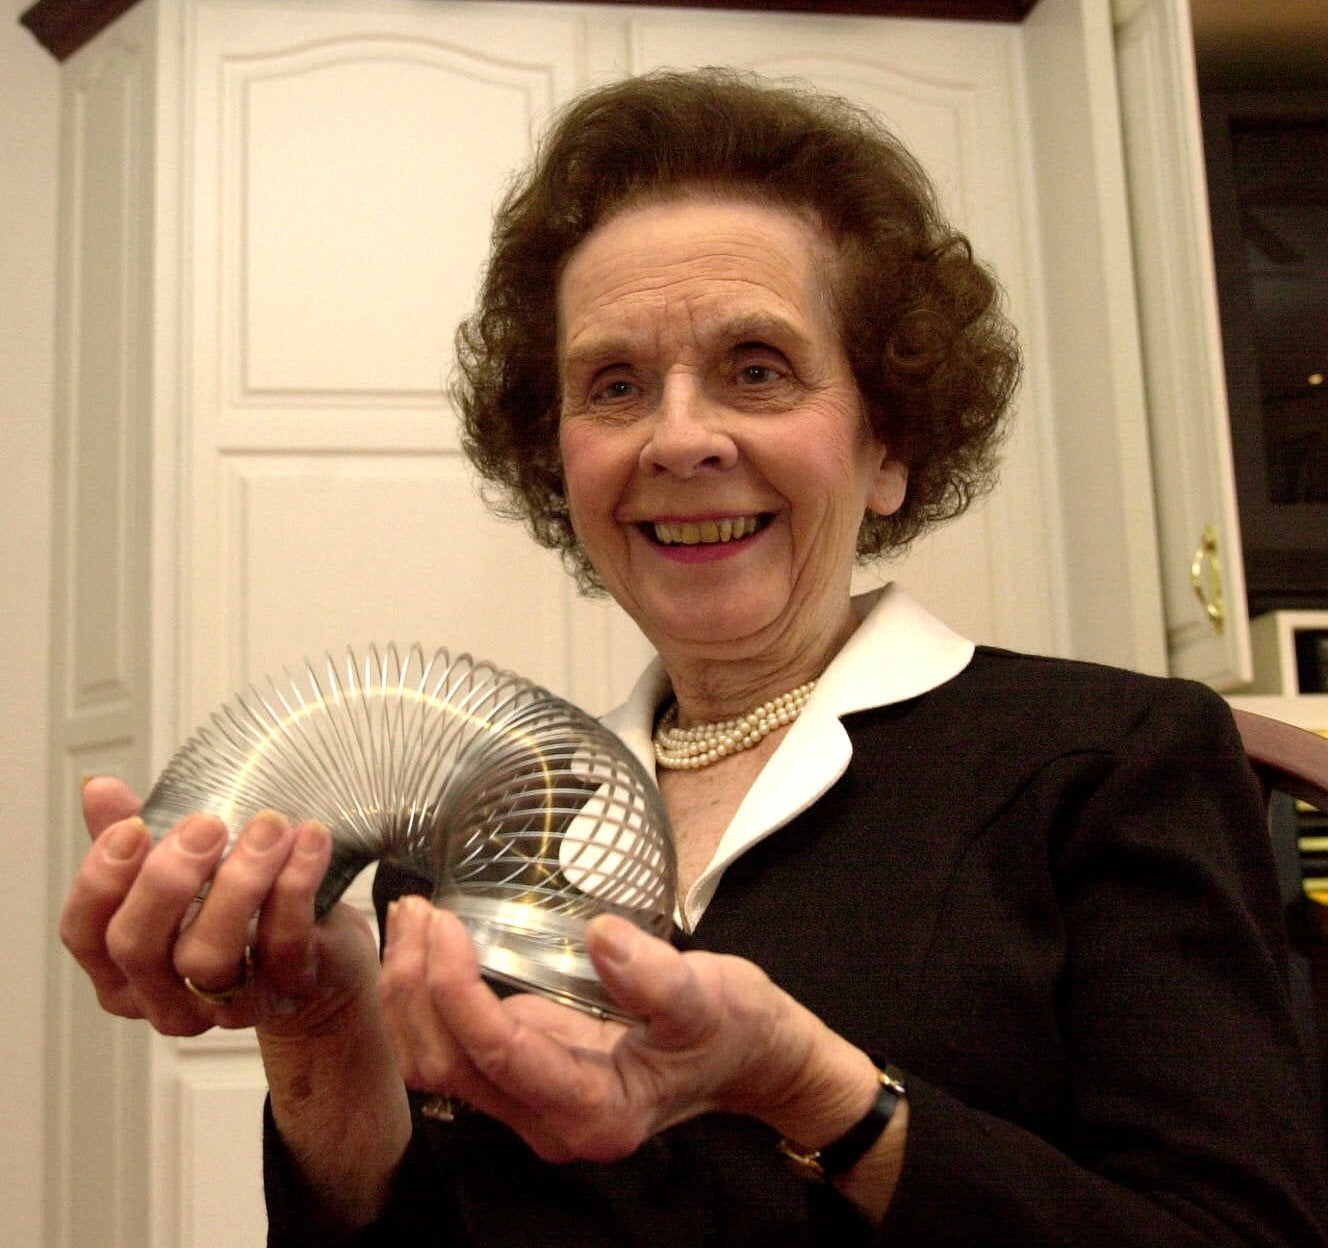 The Slinky: Invented by a man but made famous by a woman - WHYY